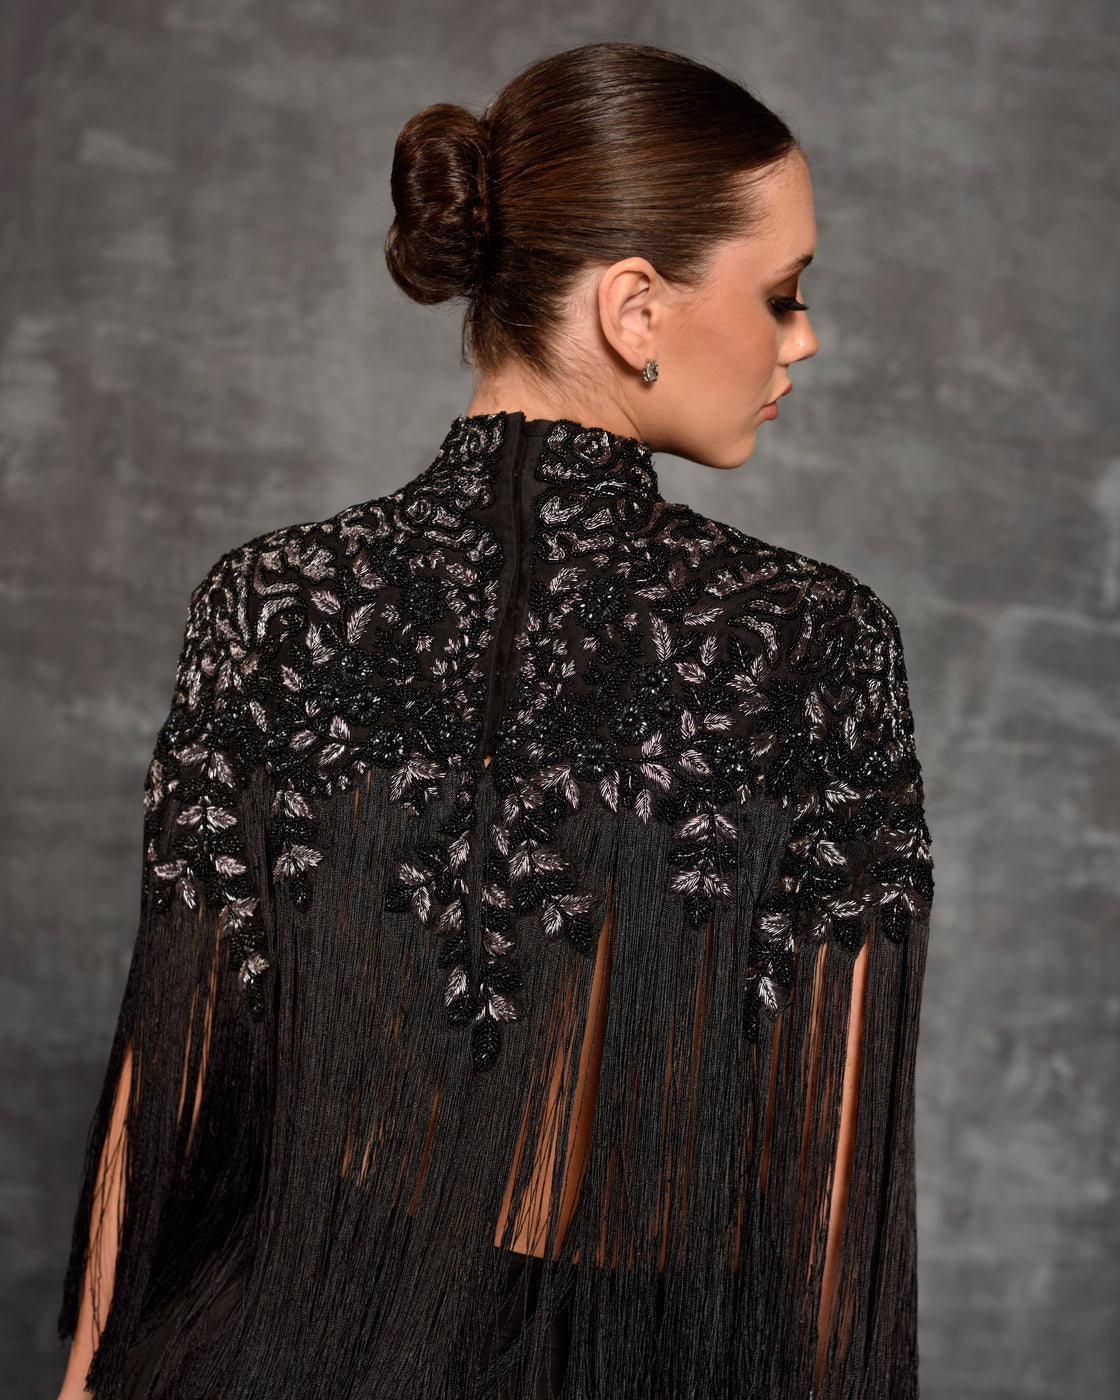 Chic black top adorned by silver and pearl embroidery